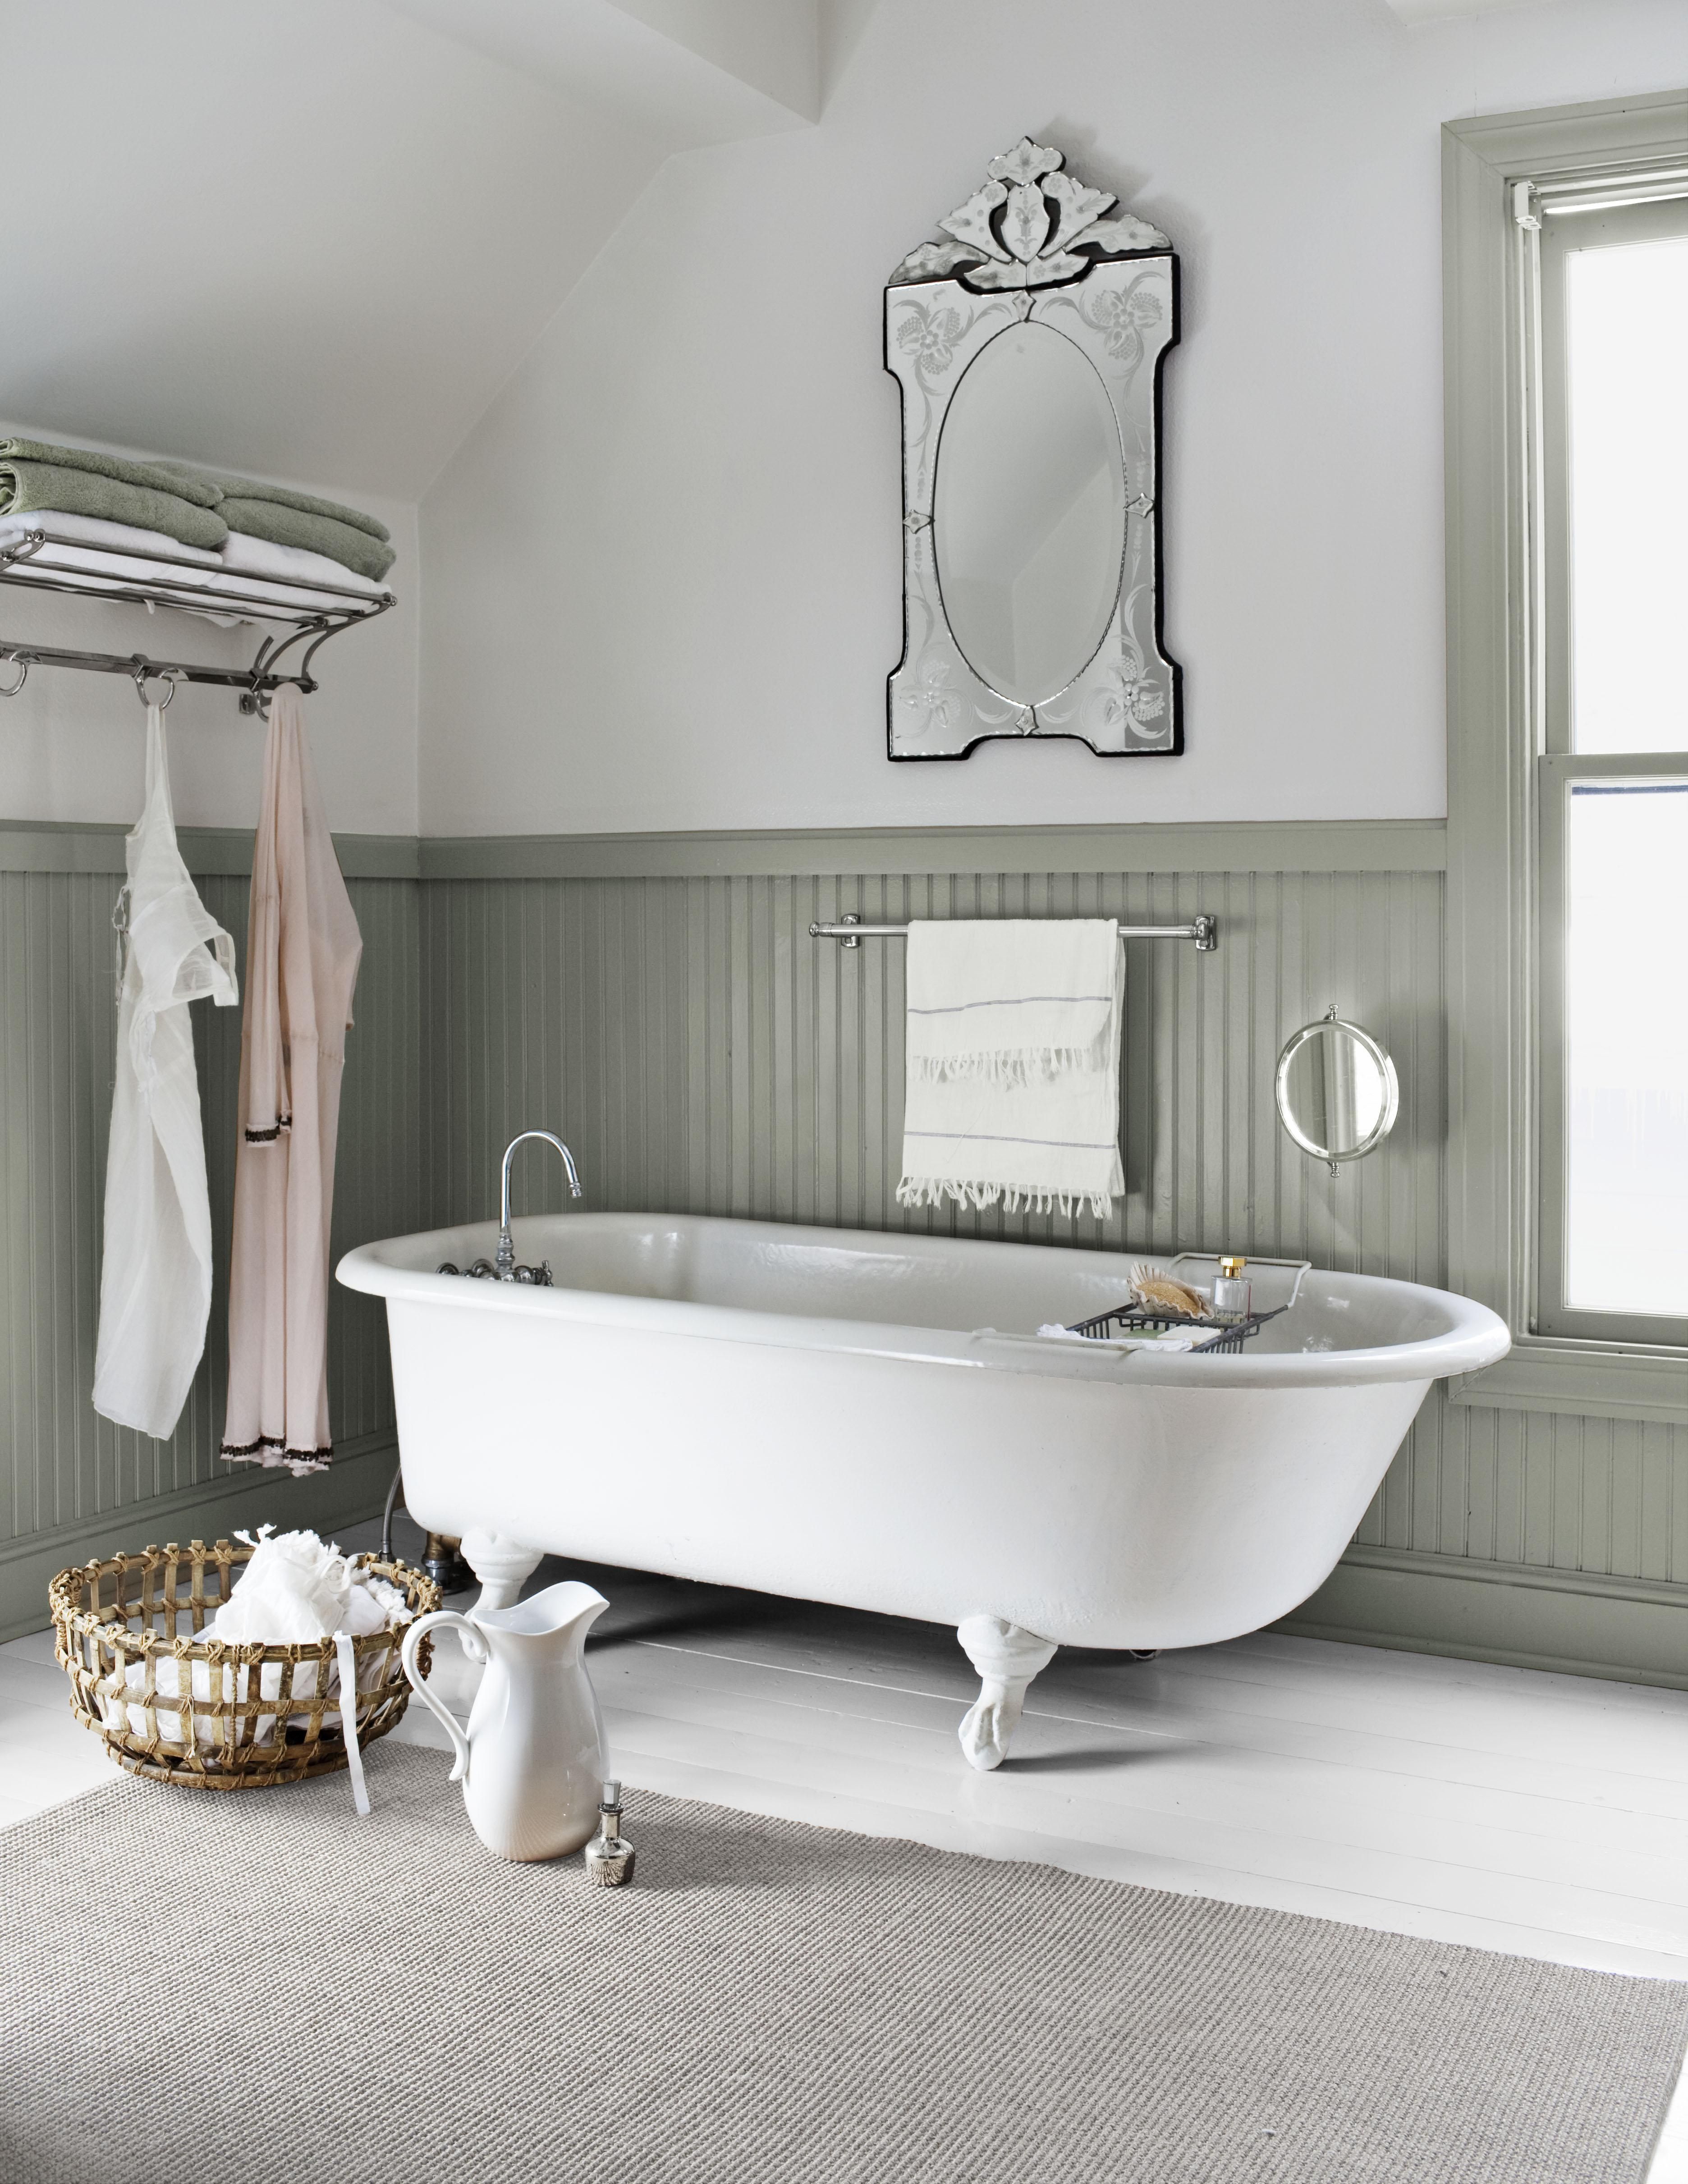 Clawfoot Tub Ideas For Your Bathroom, Vanity To Go With Clawfoot Tub